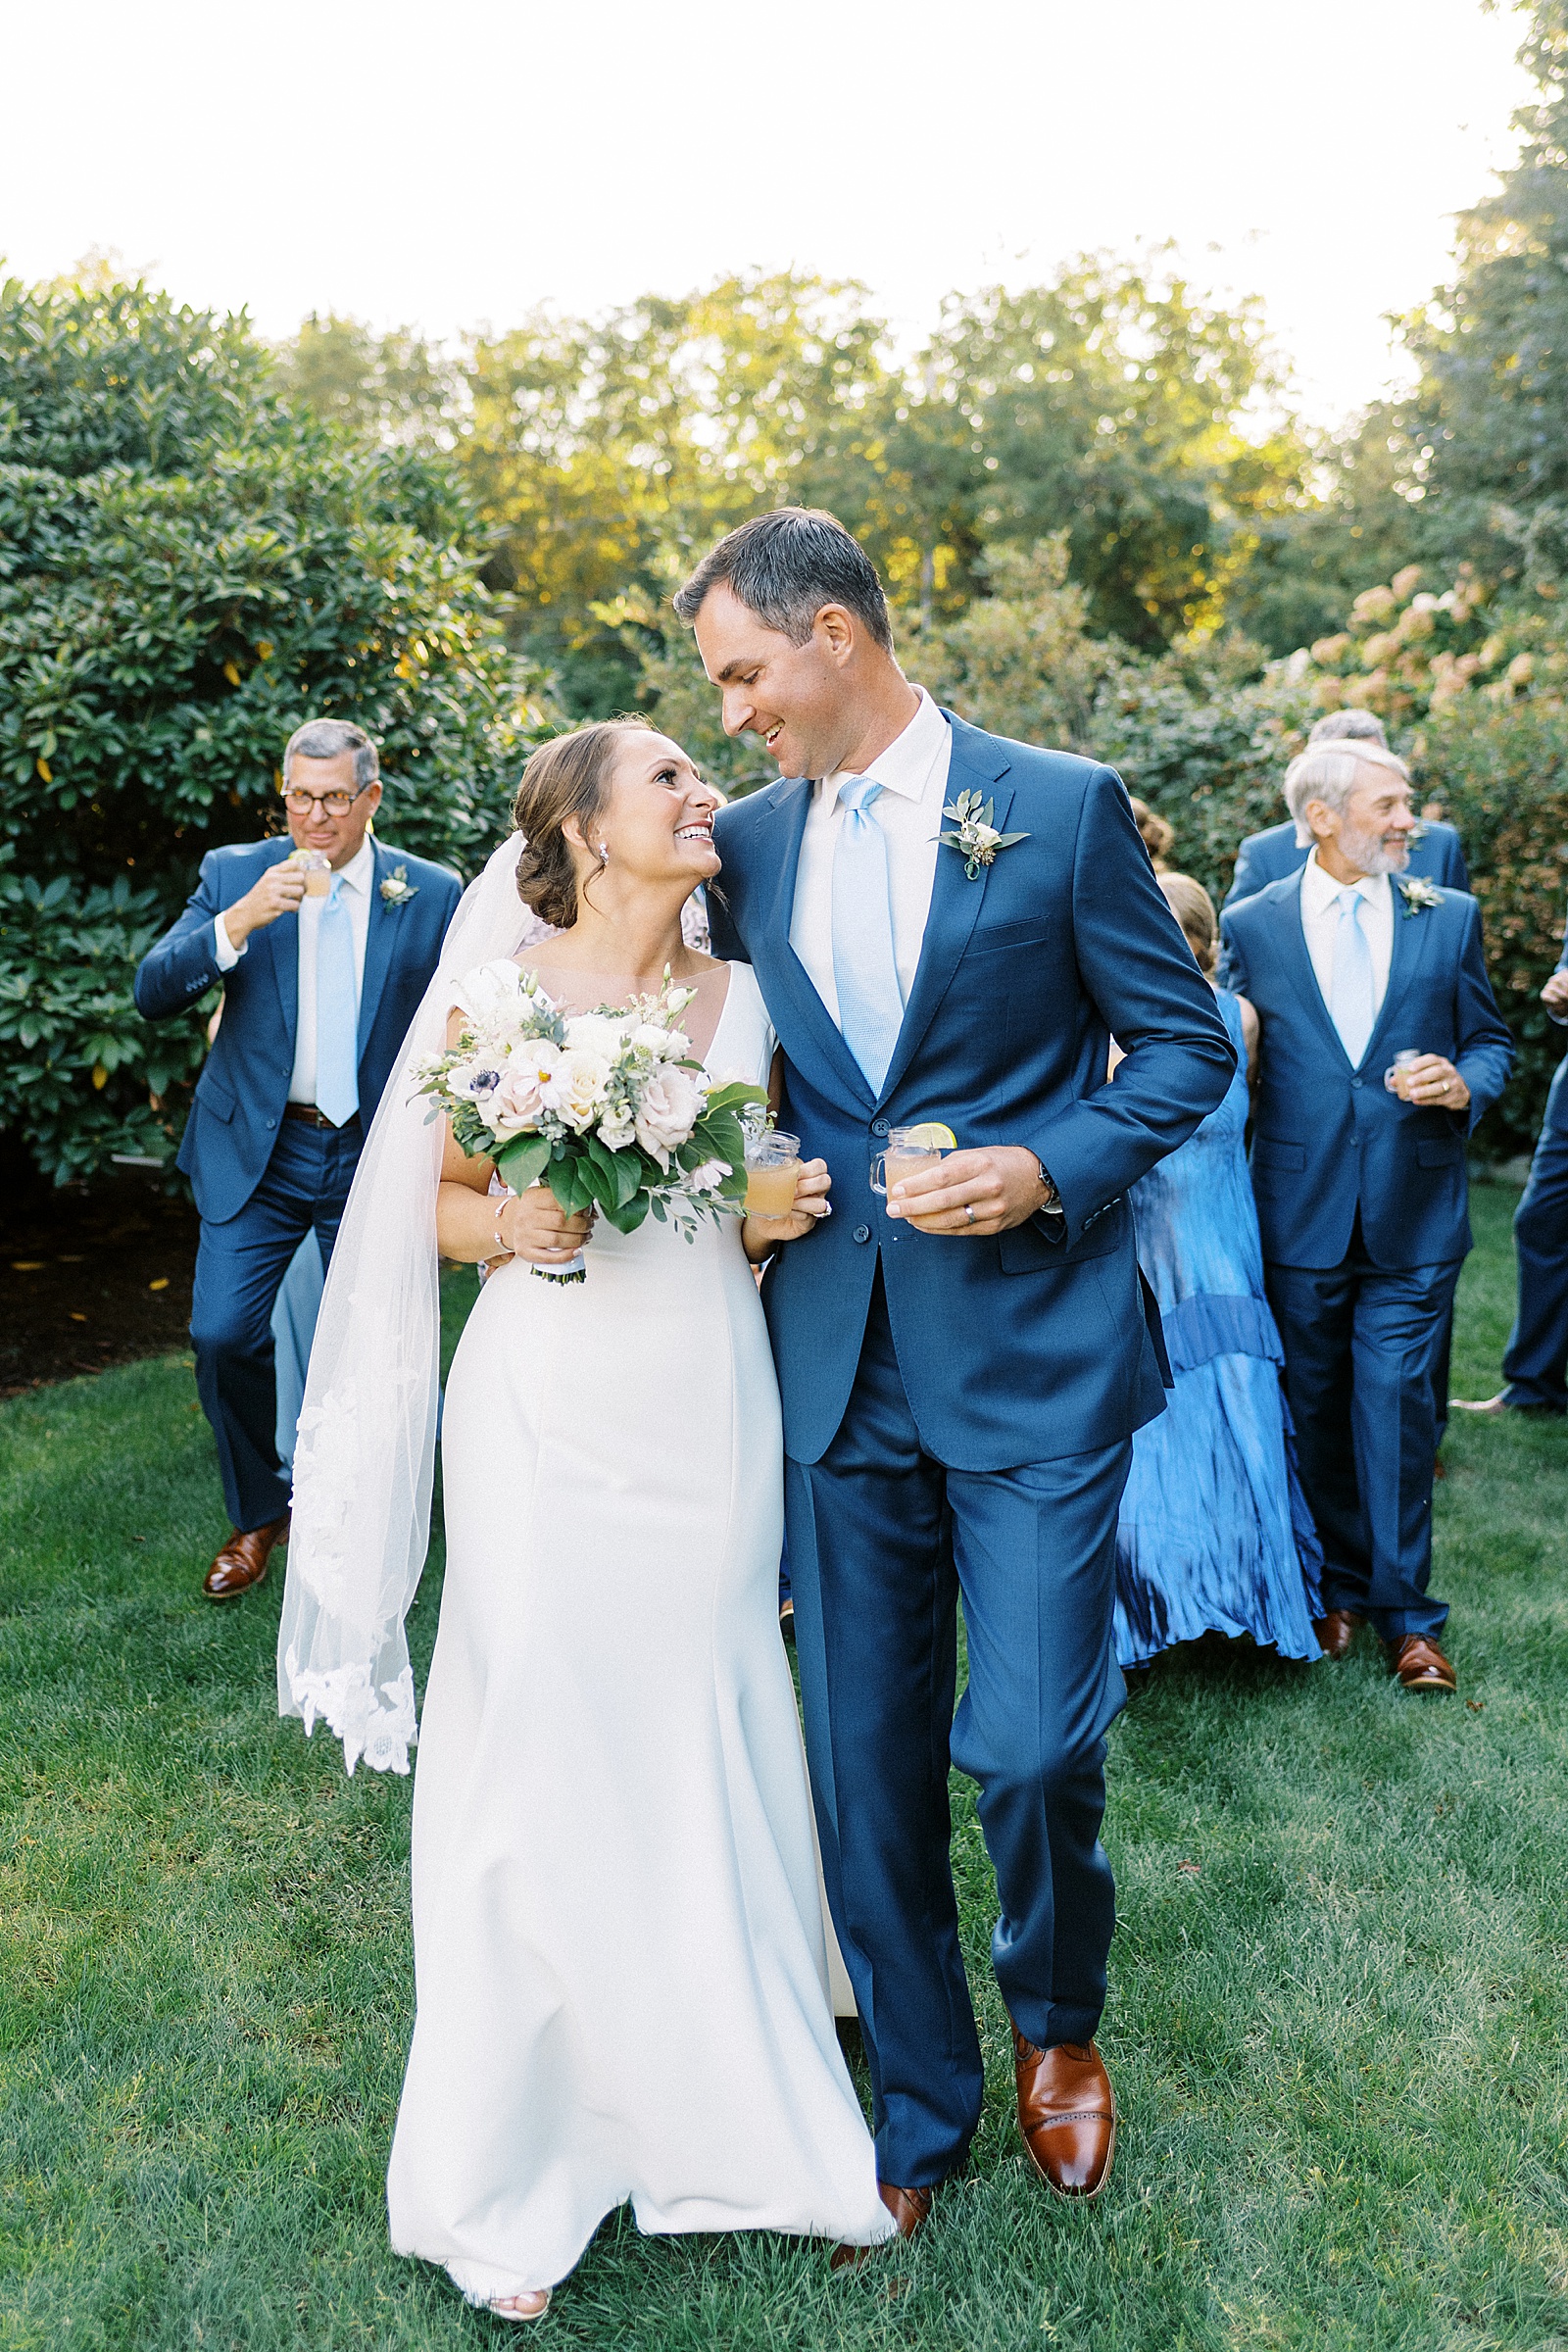 Newlyweds smiling at each other before reception by Cape Cod wedding photographer Lynne Reznick